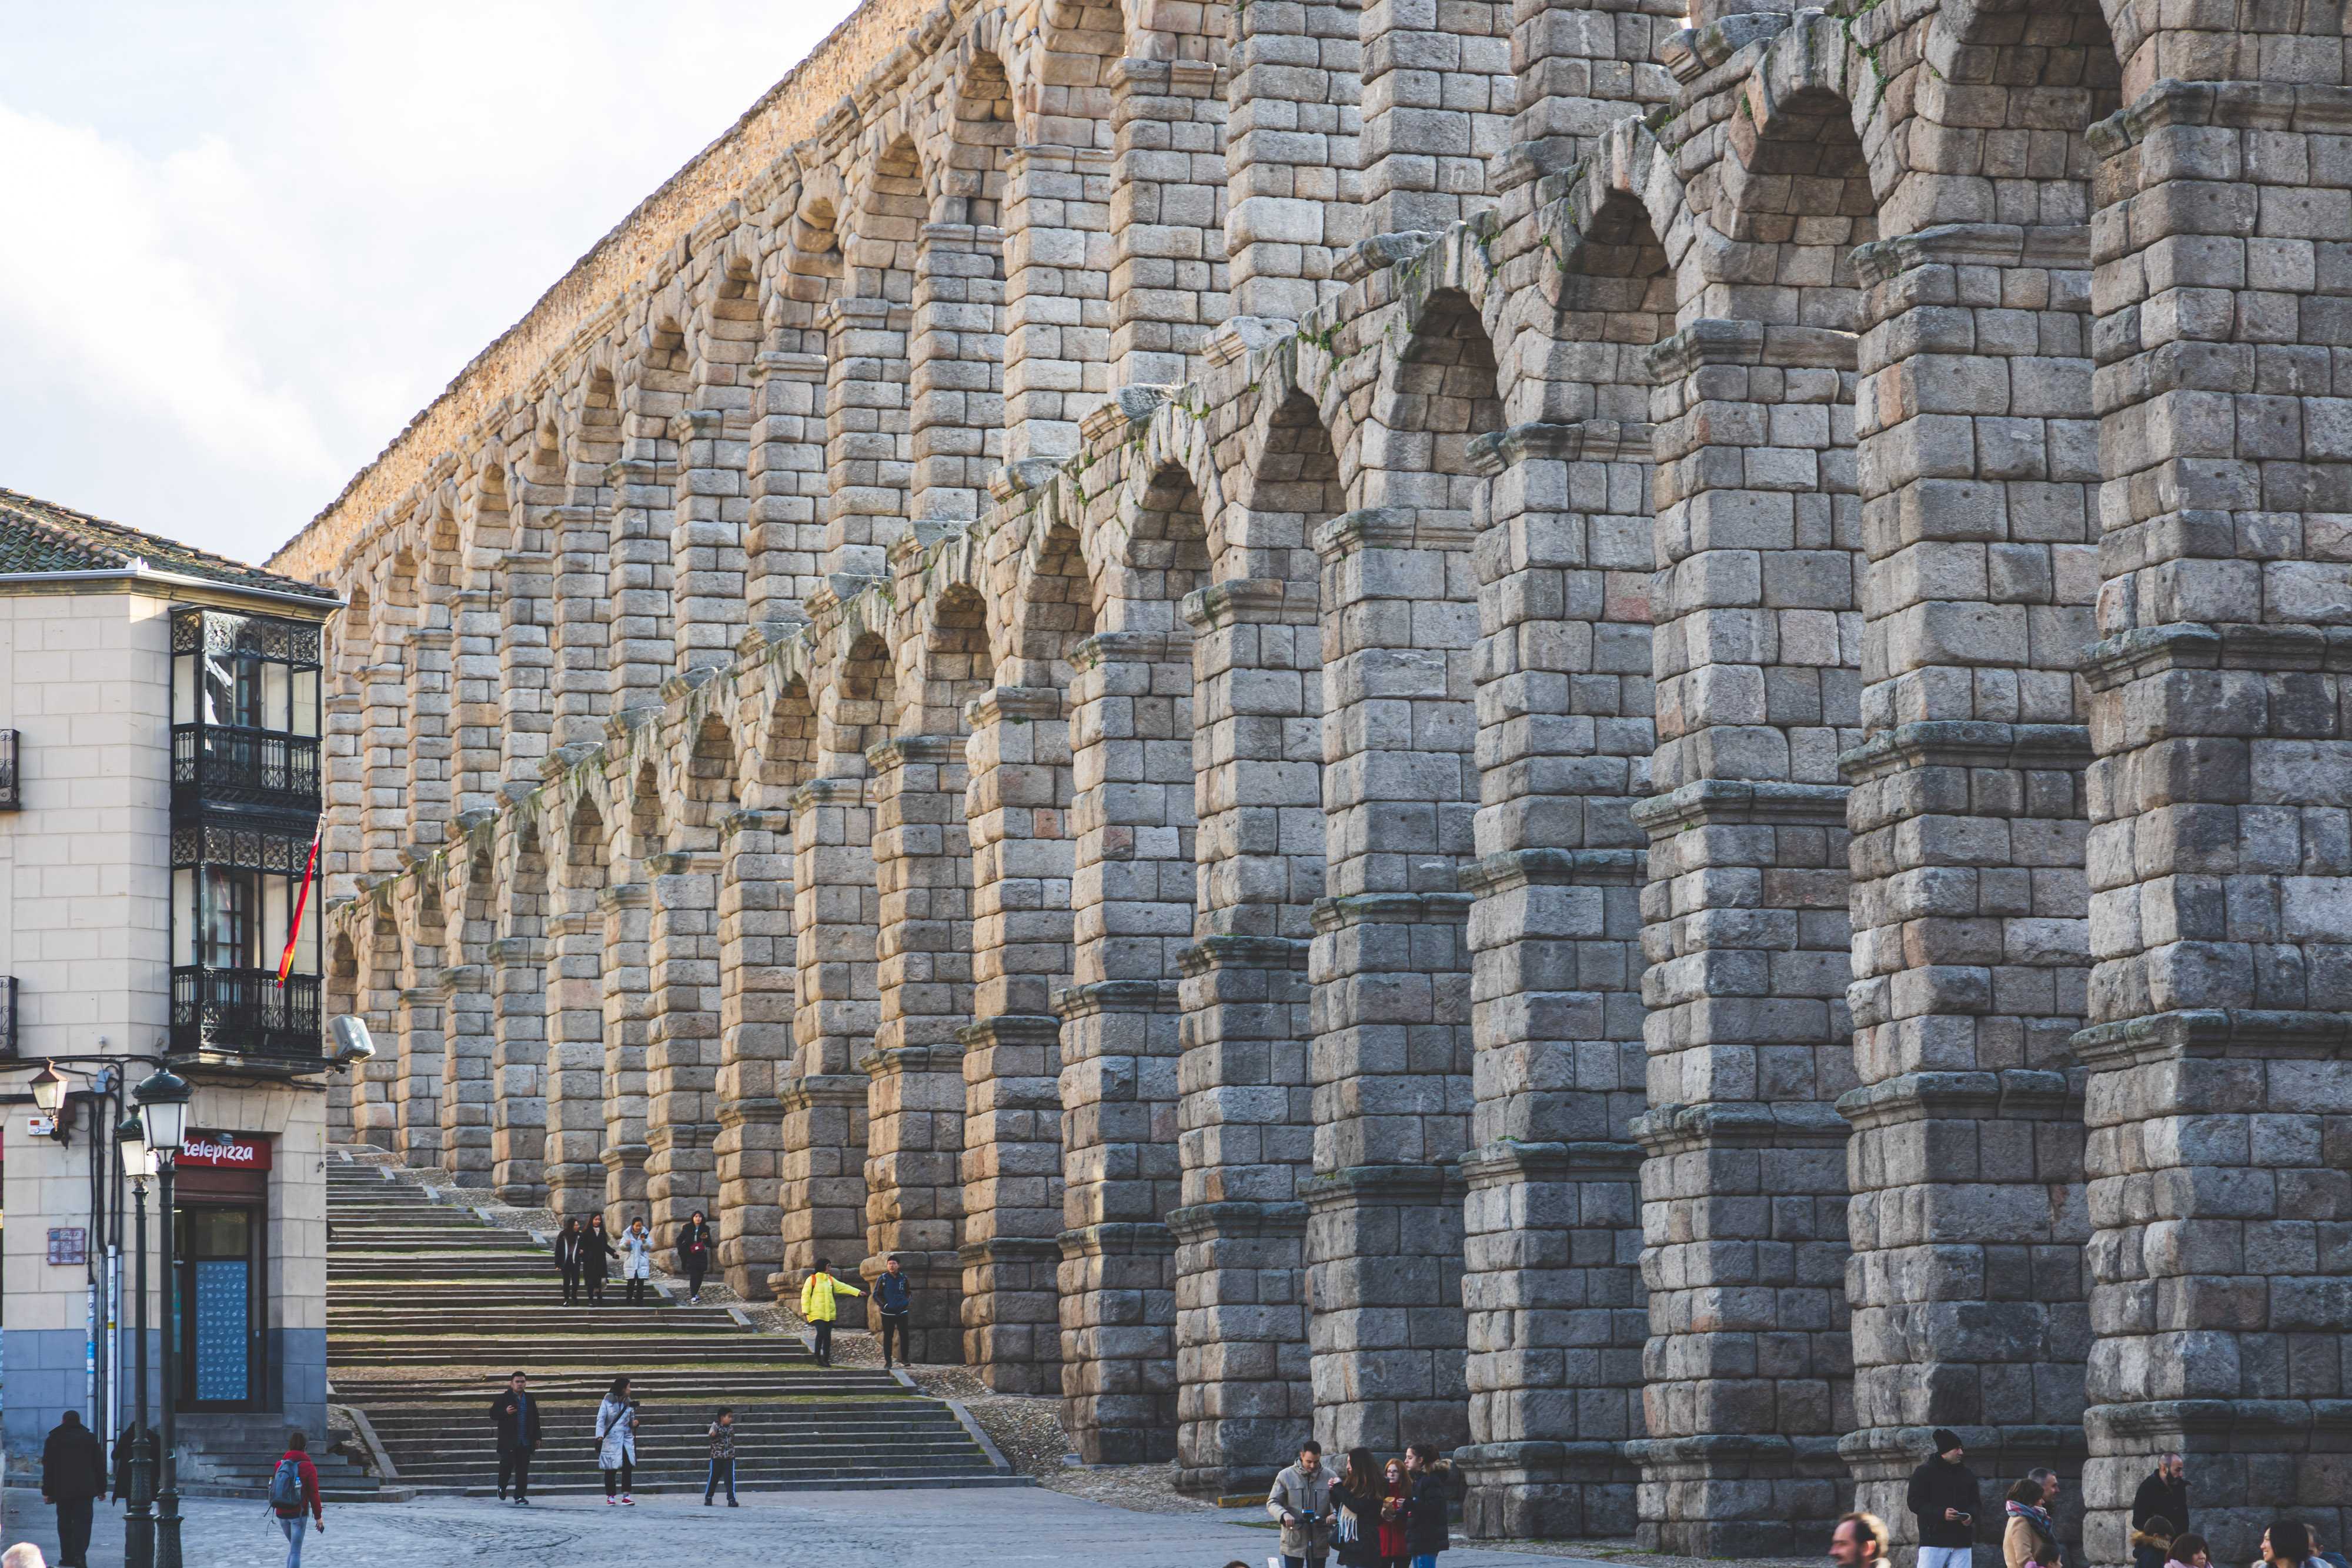 A massive Roman aqueduct bathed in golden evening light, showing its massive stone blocks that form two stacked sets of tall arches comprising its height. People can be seen walking around its base, and climing wide stairs that run parallel to it, made to look tiny by comparison.